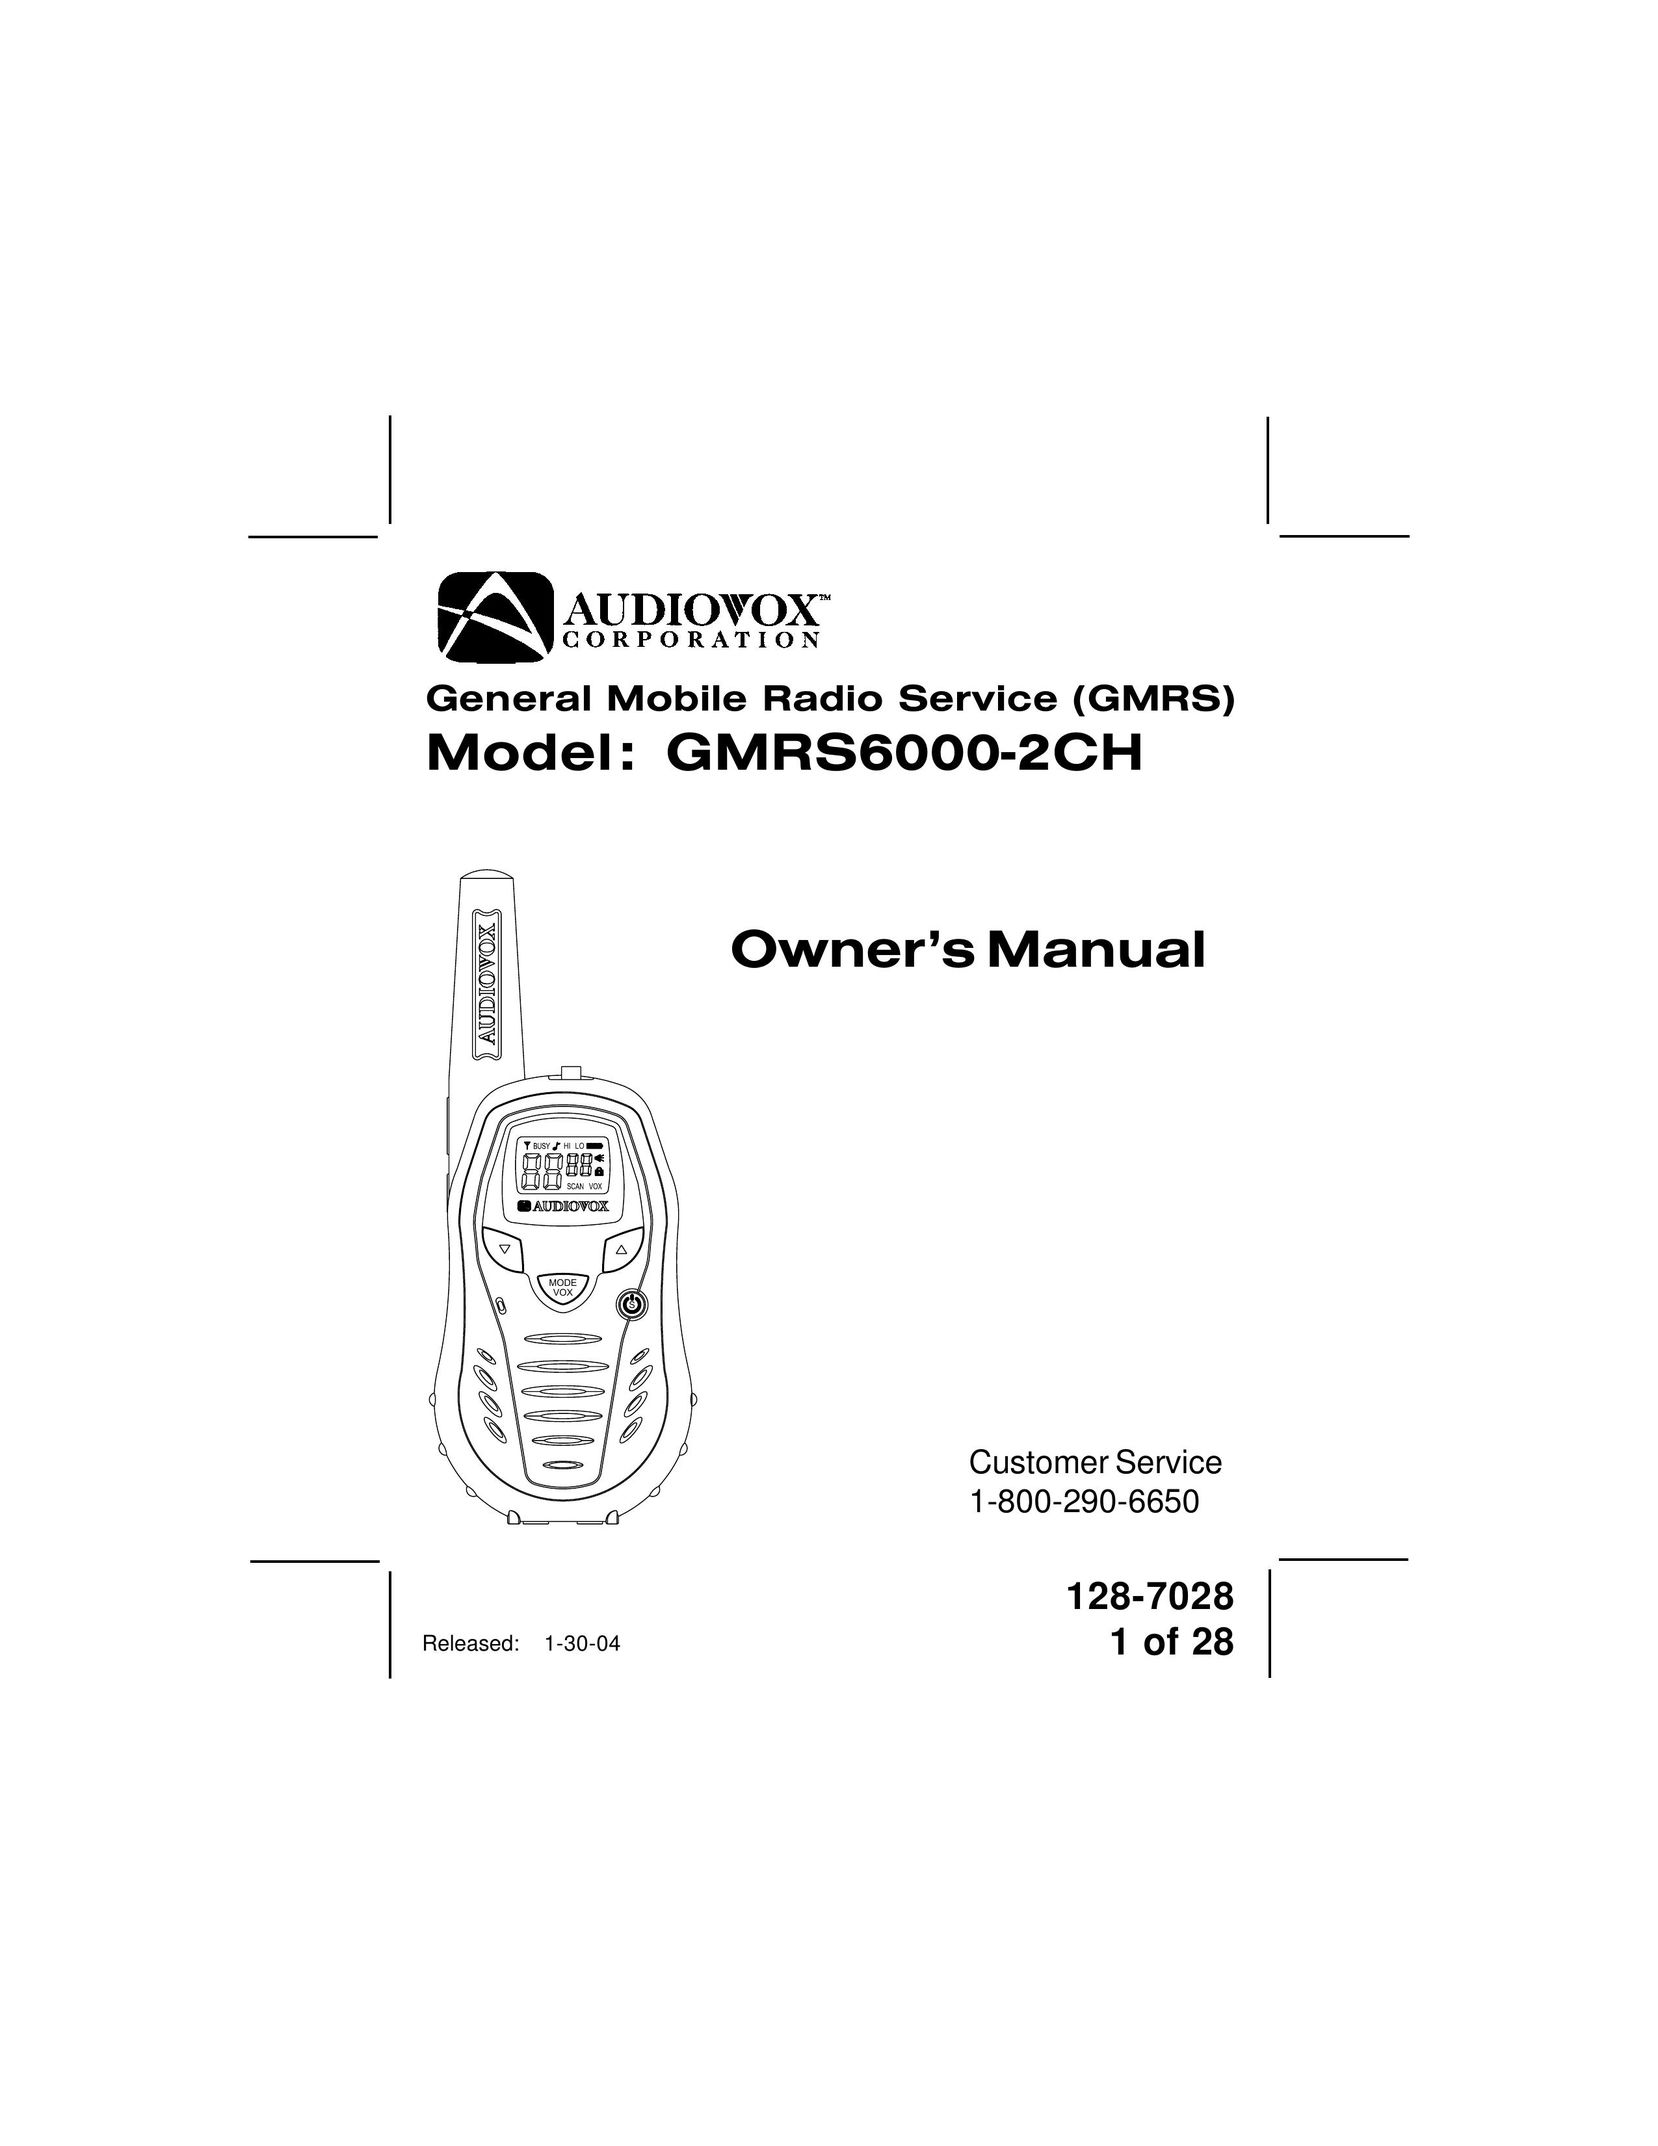 Audiovox GMRS6000-2CH Portable Radio User Manual